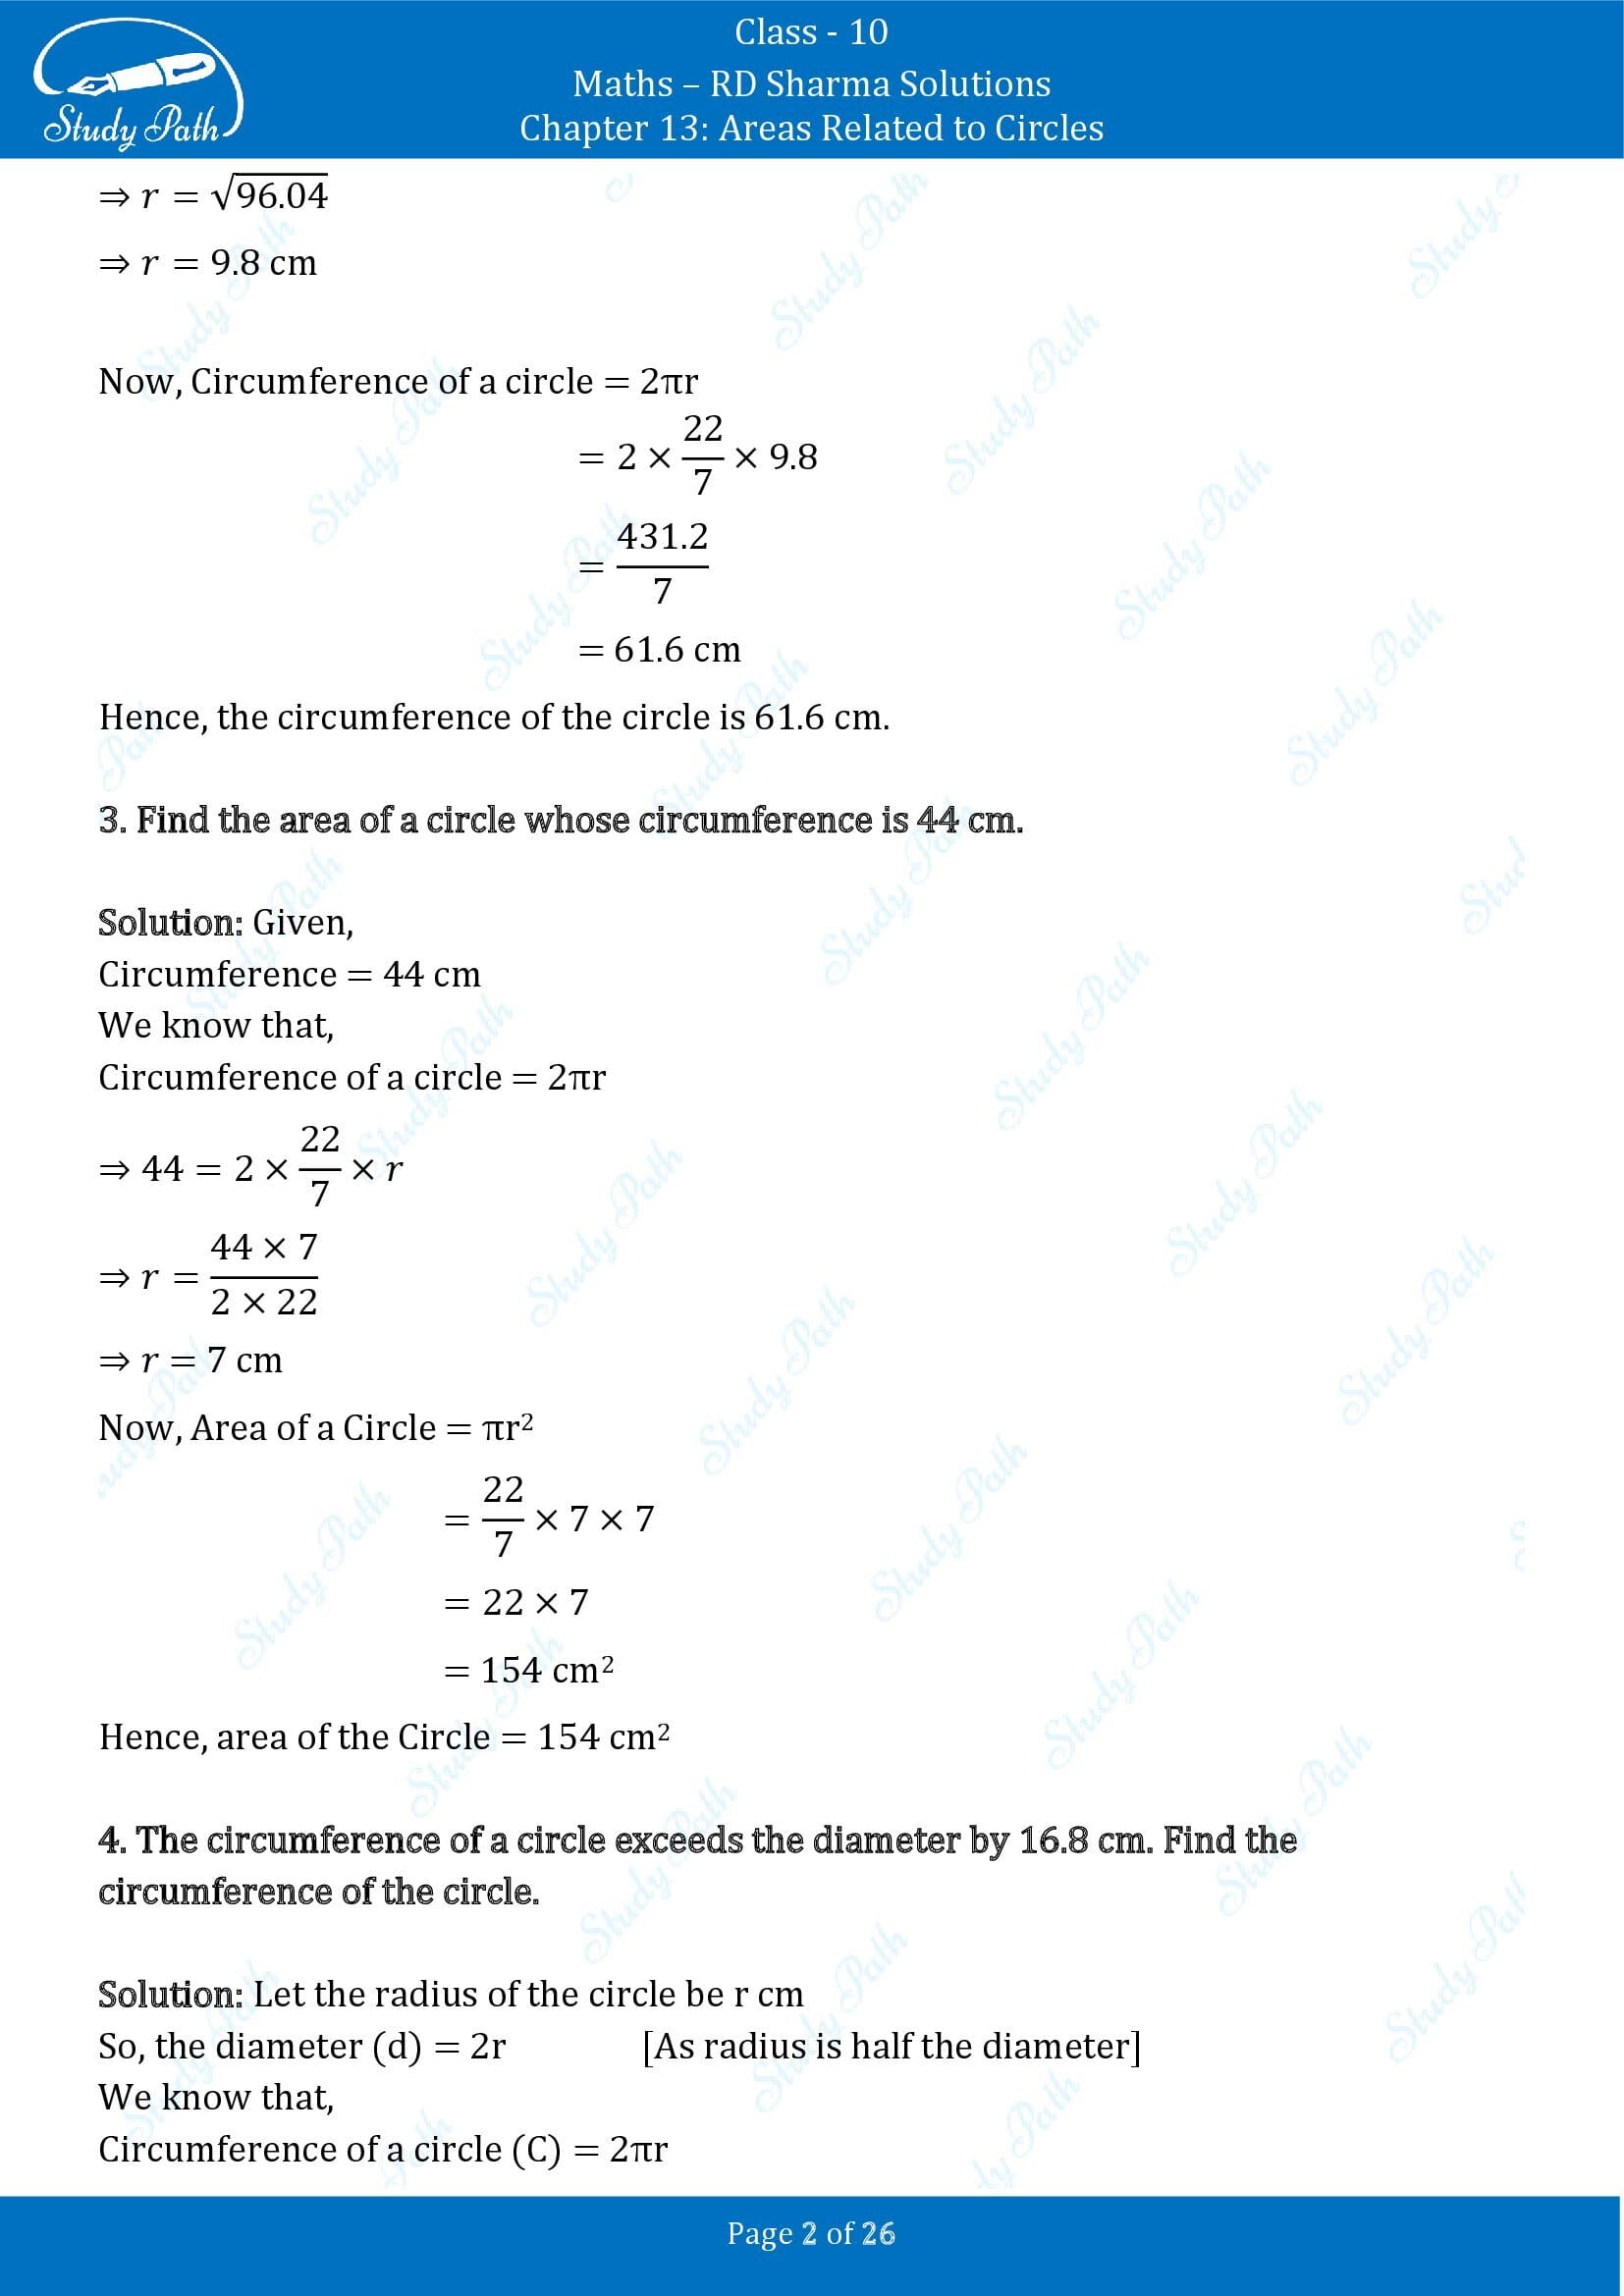 RD Sharma Solutions Class 10 Chapter 13 Areas Related to Circles Exercise 13.1 00002